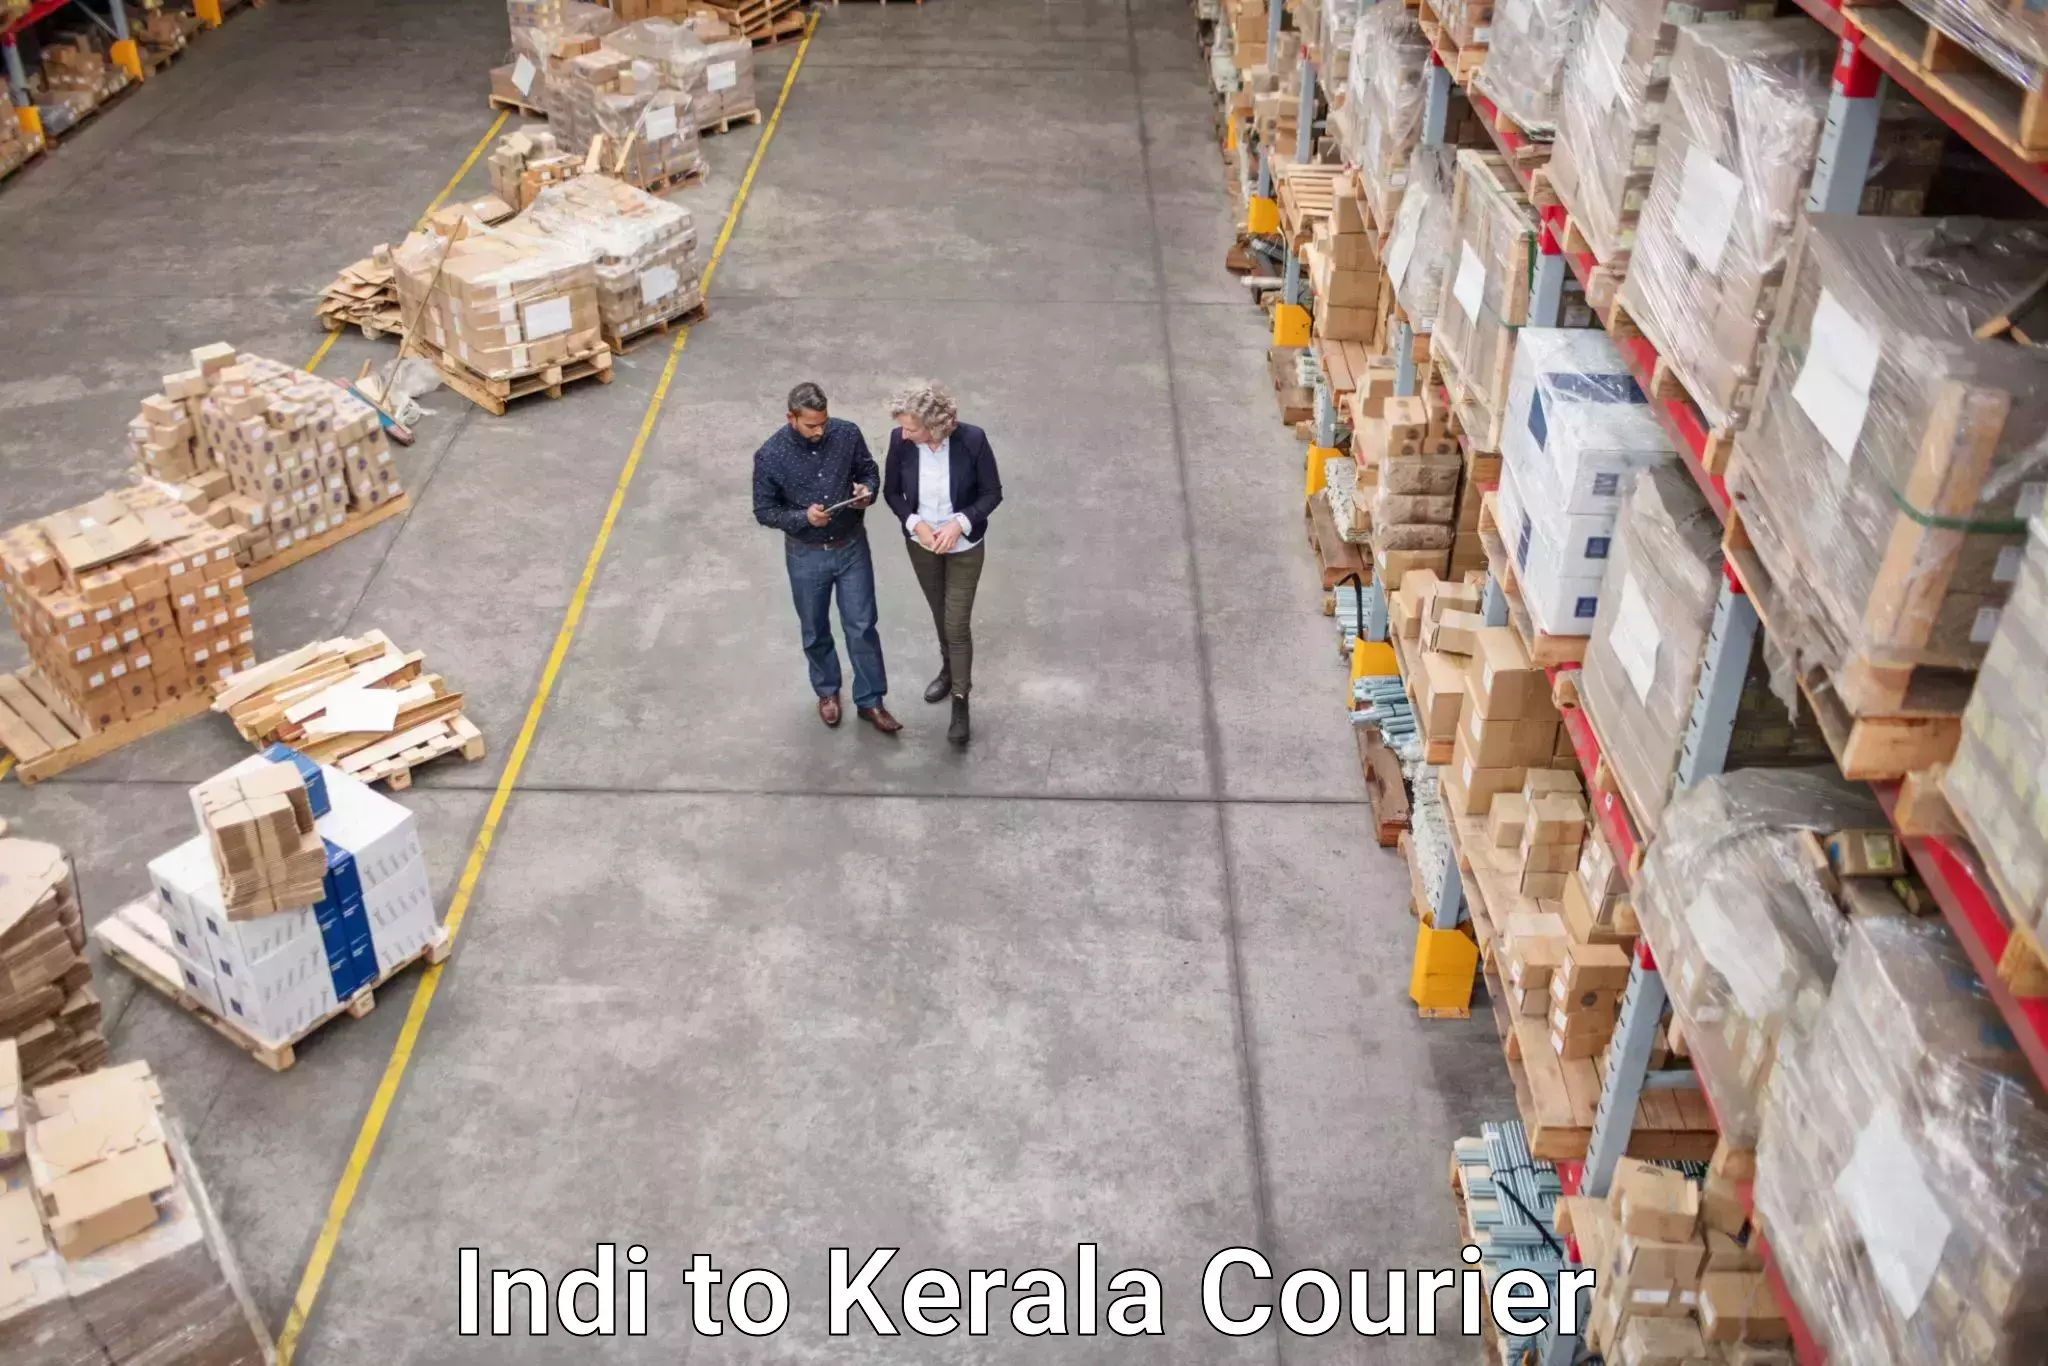 User-friendly delivery service Indi to Kerala